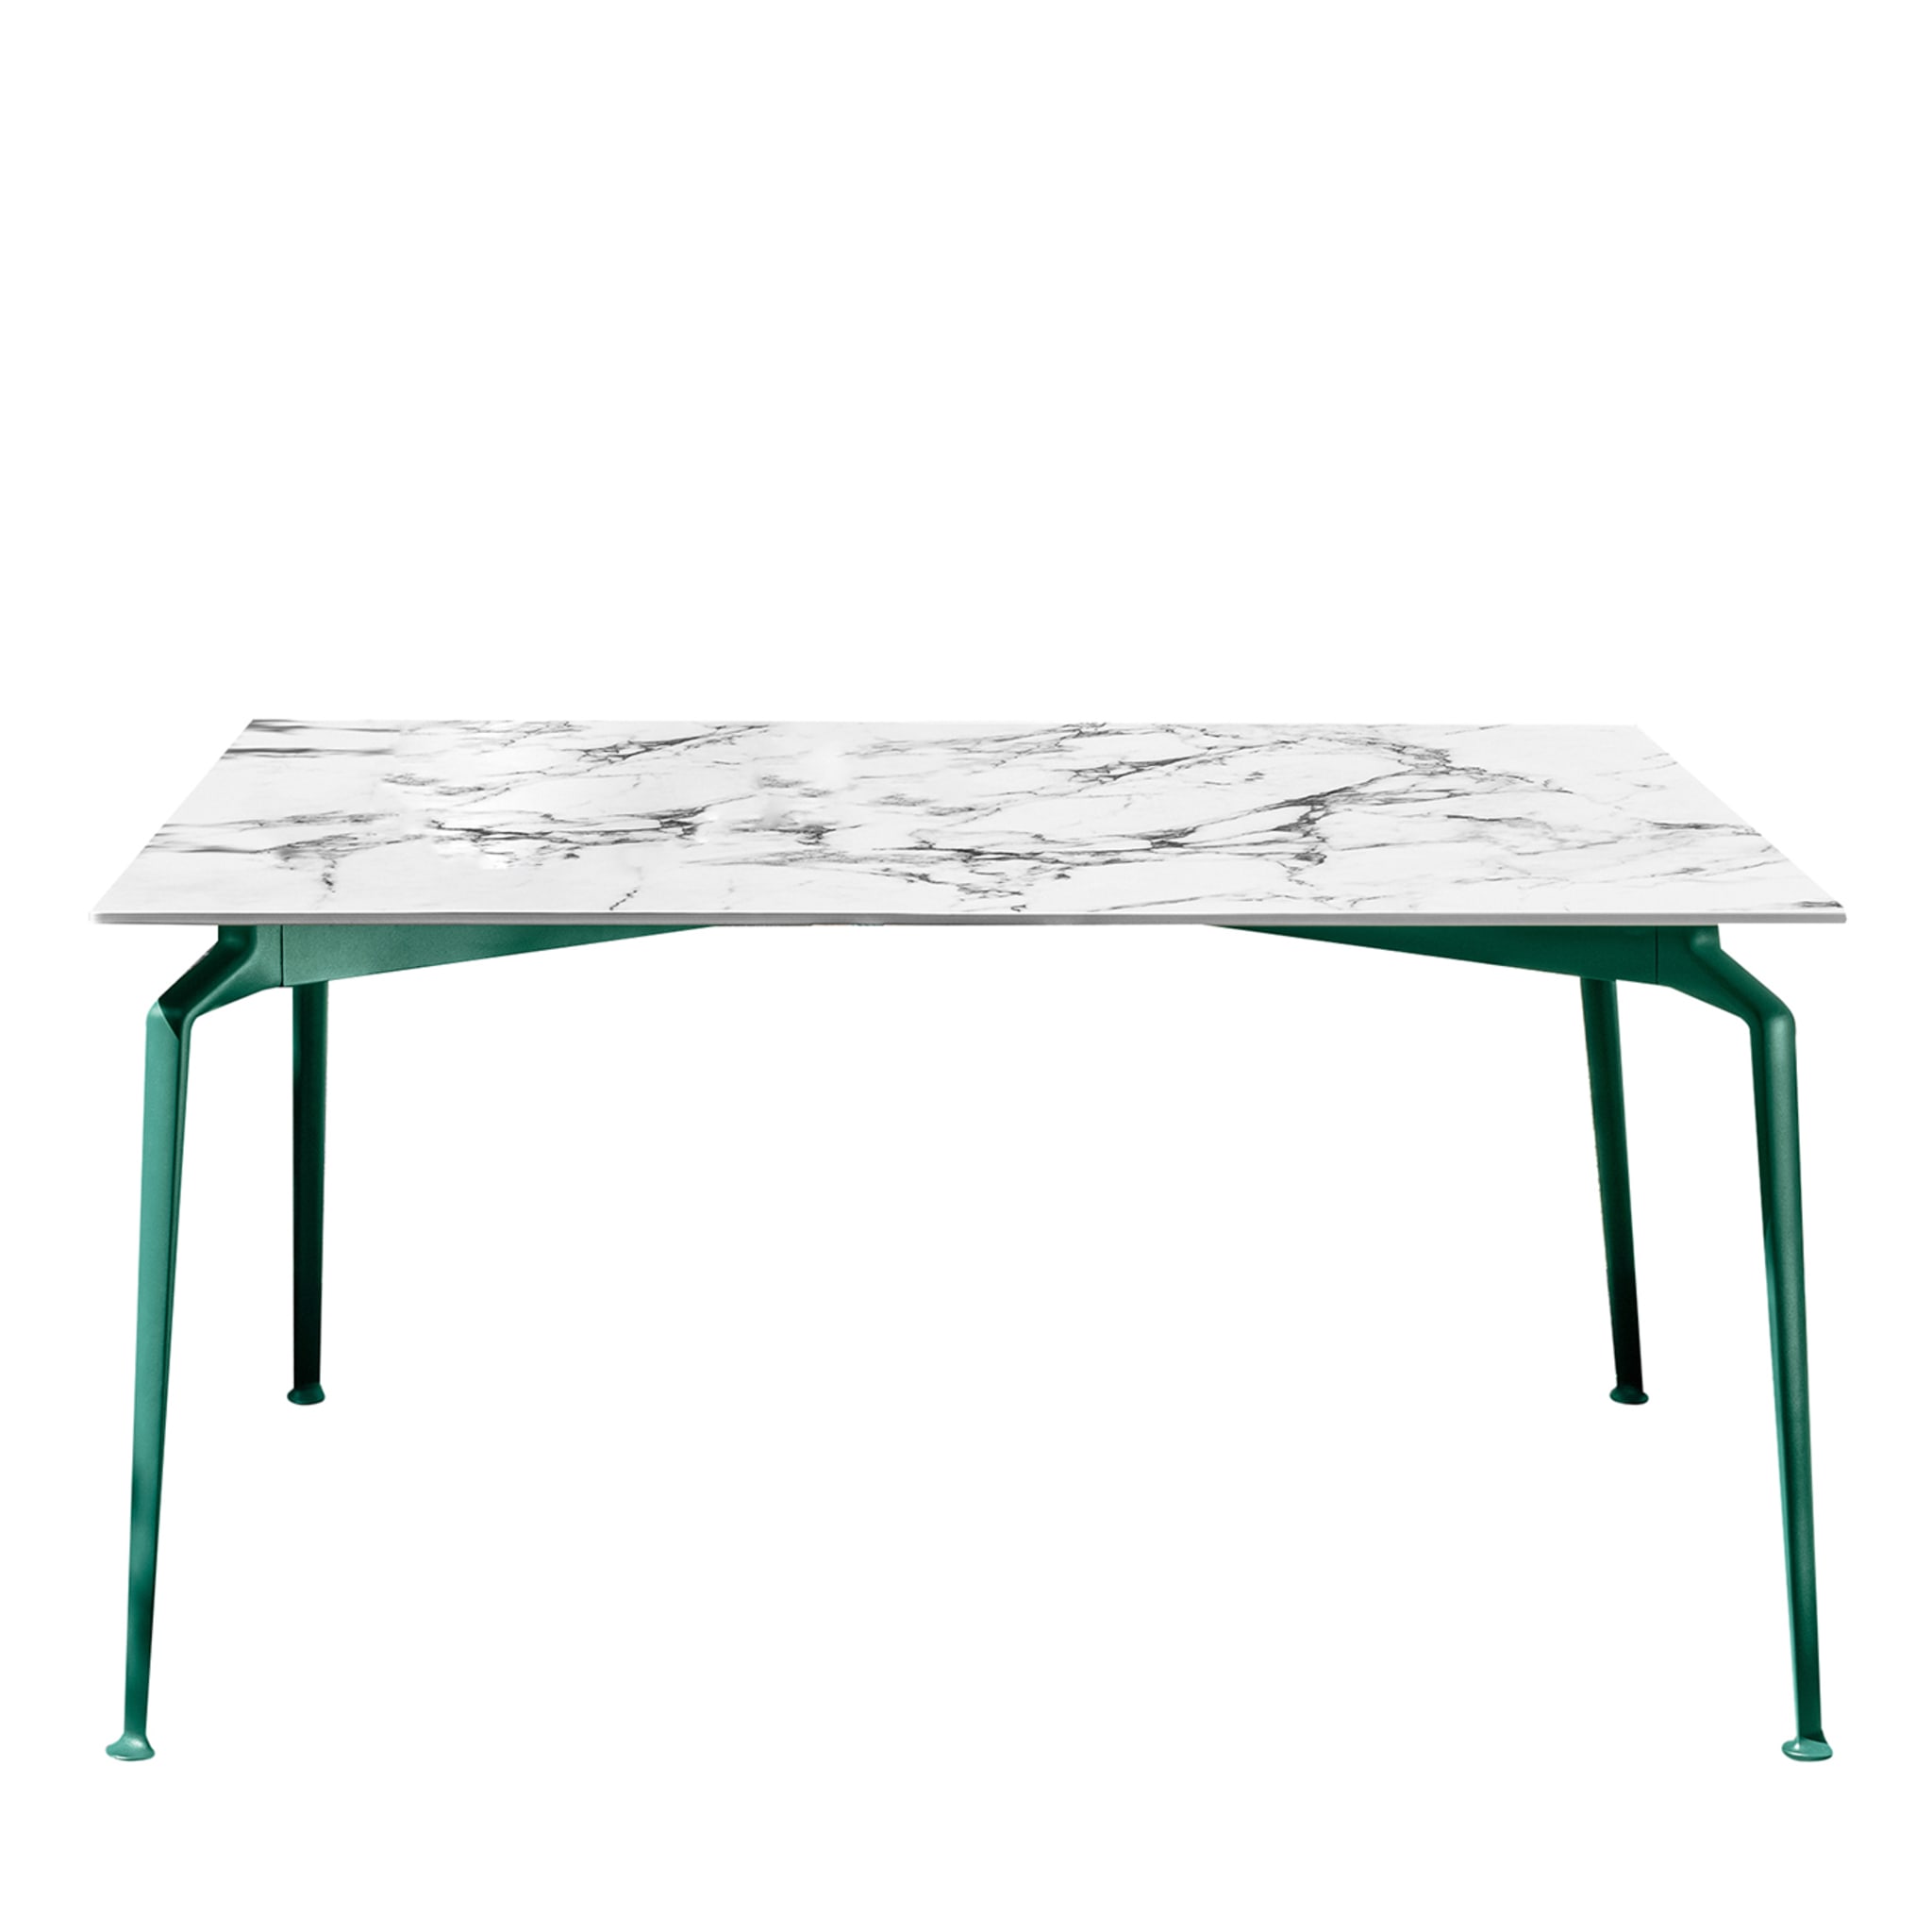 Cruise Alu Square Dining Table by Ludovica & Roberto Palomba - Main view